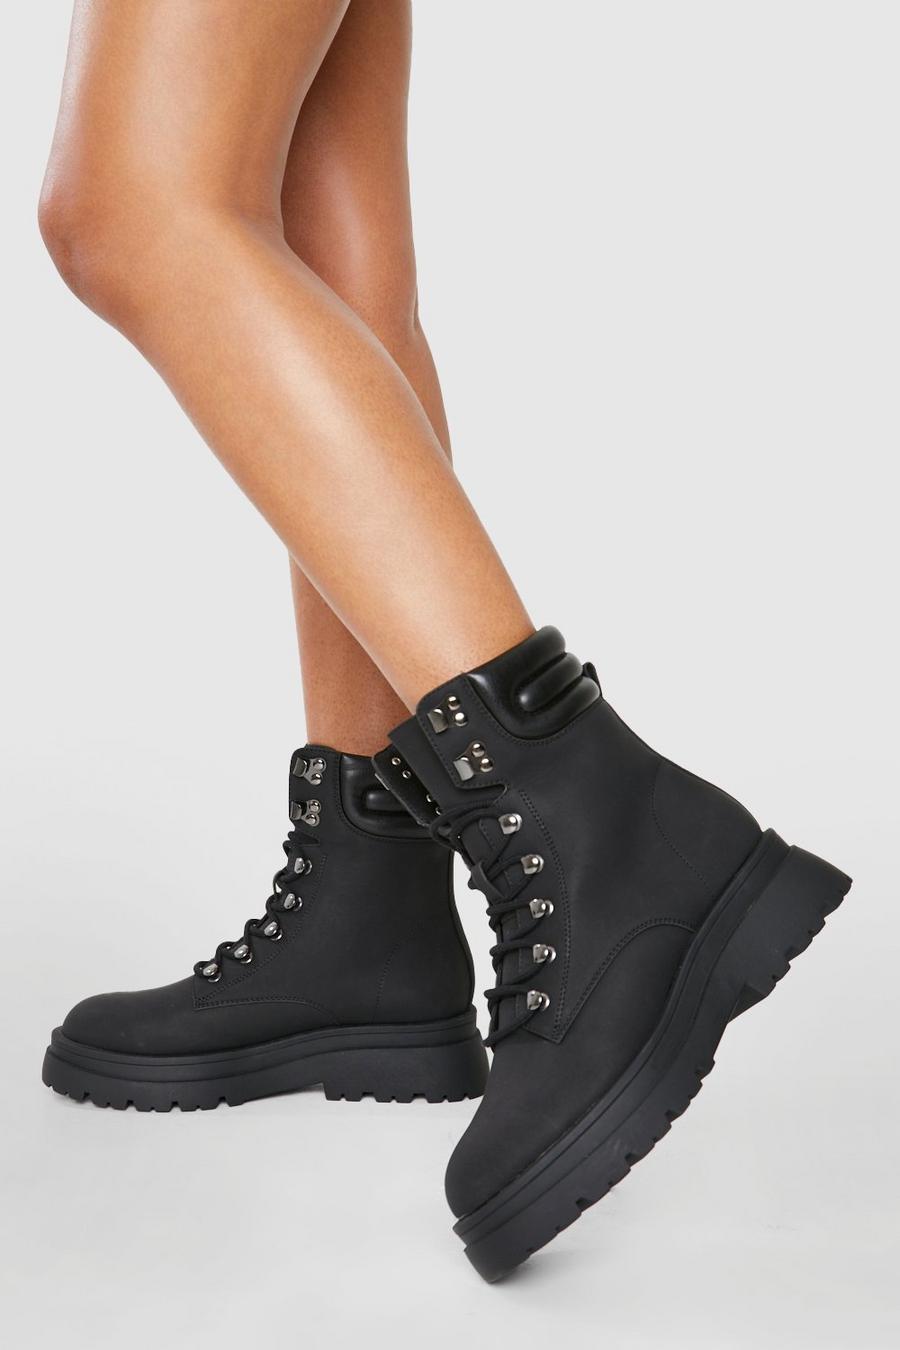 Black Cleated Sole Lace Up Hiker Boots image number 1